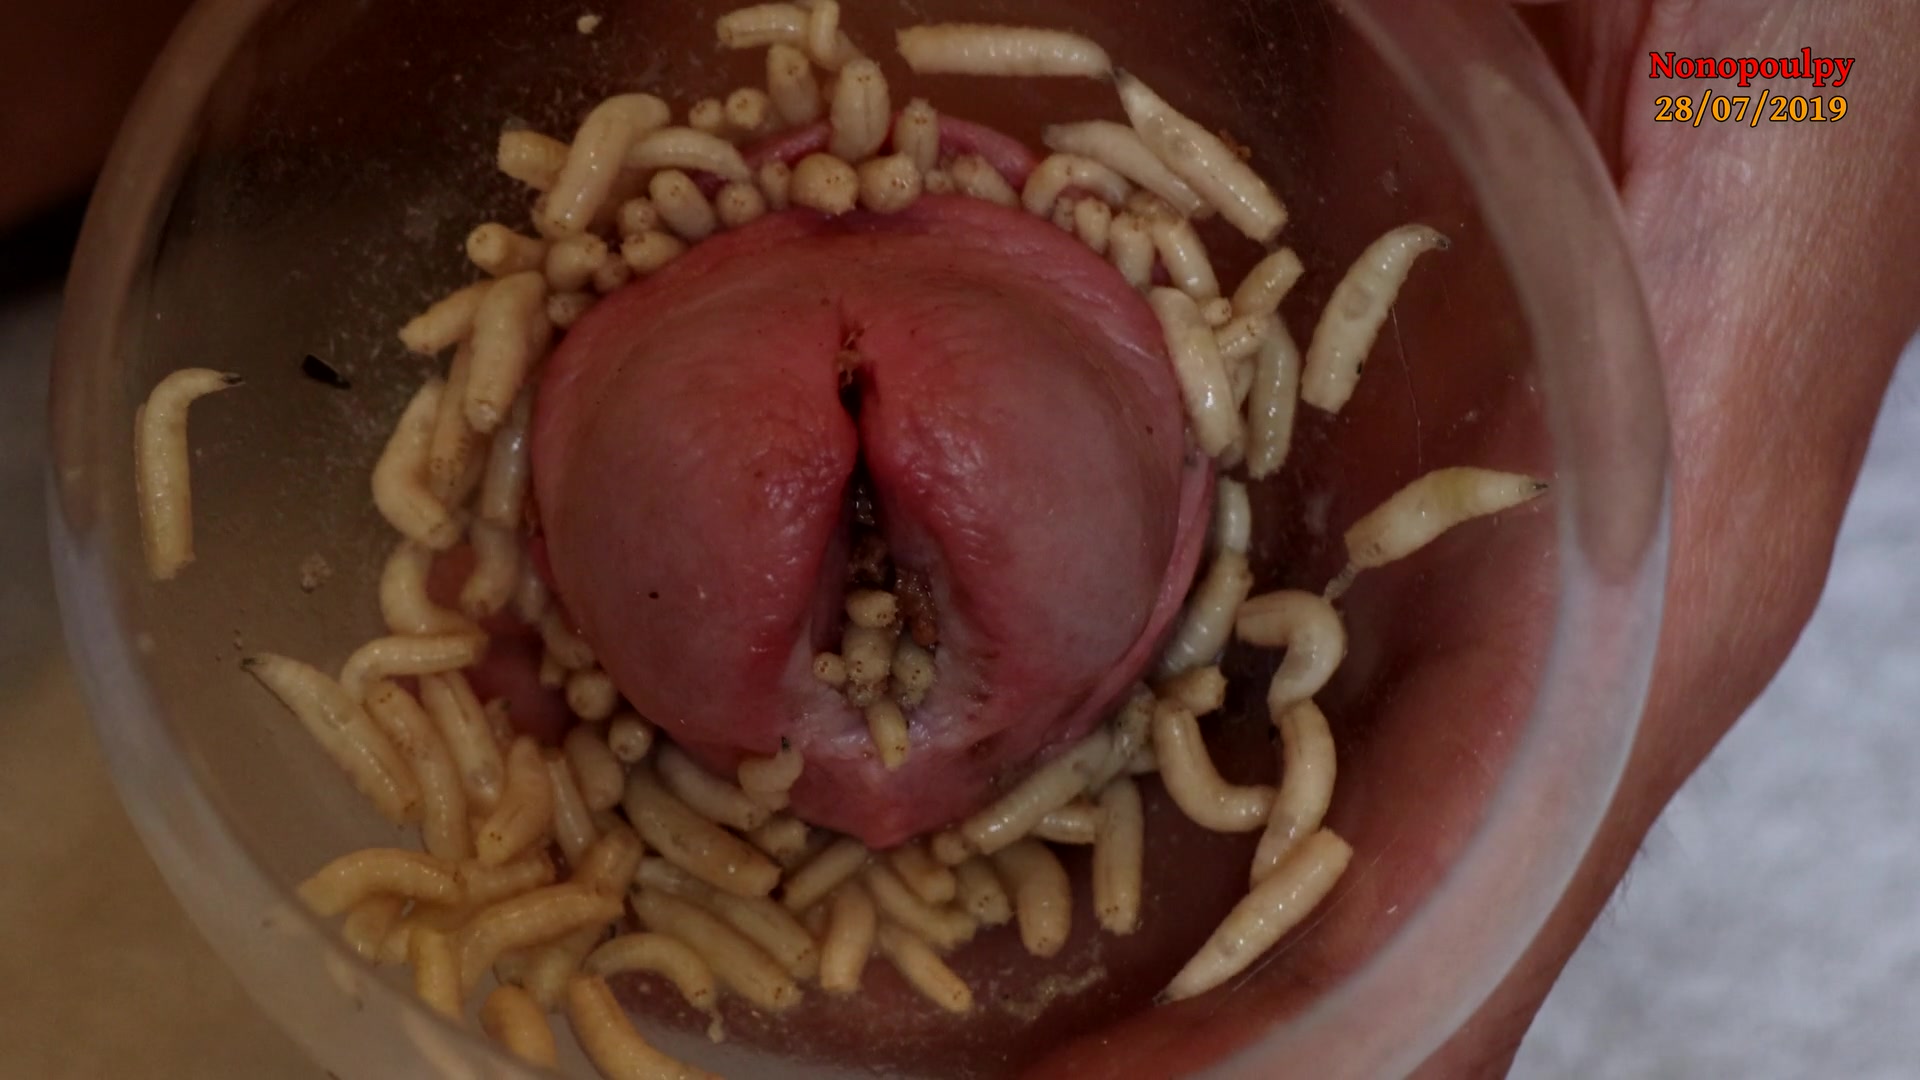 Maggots in foreskin and peehole